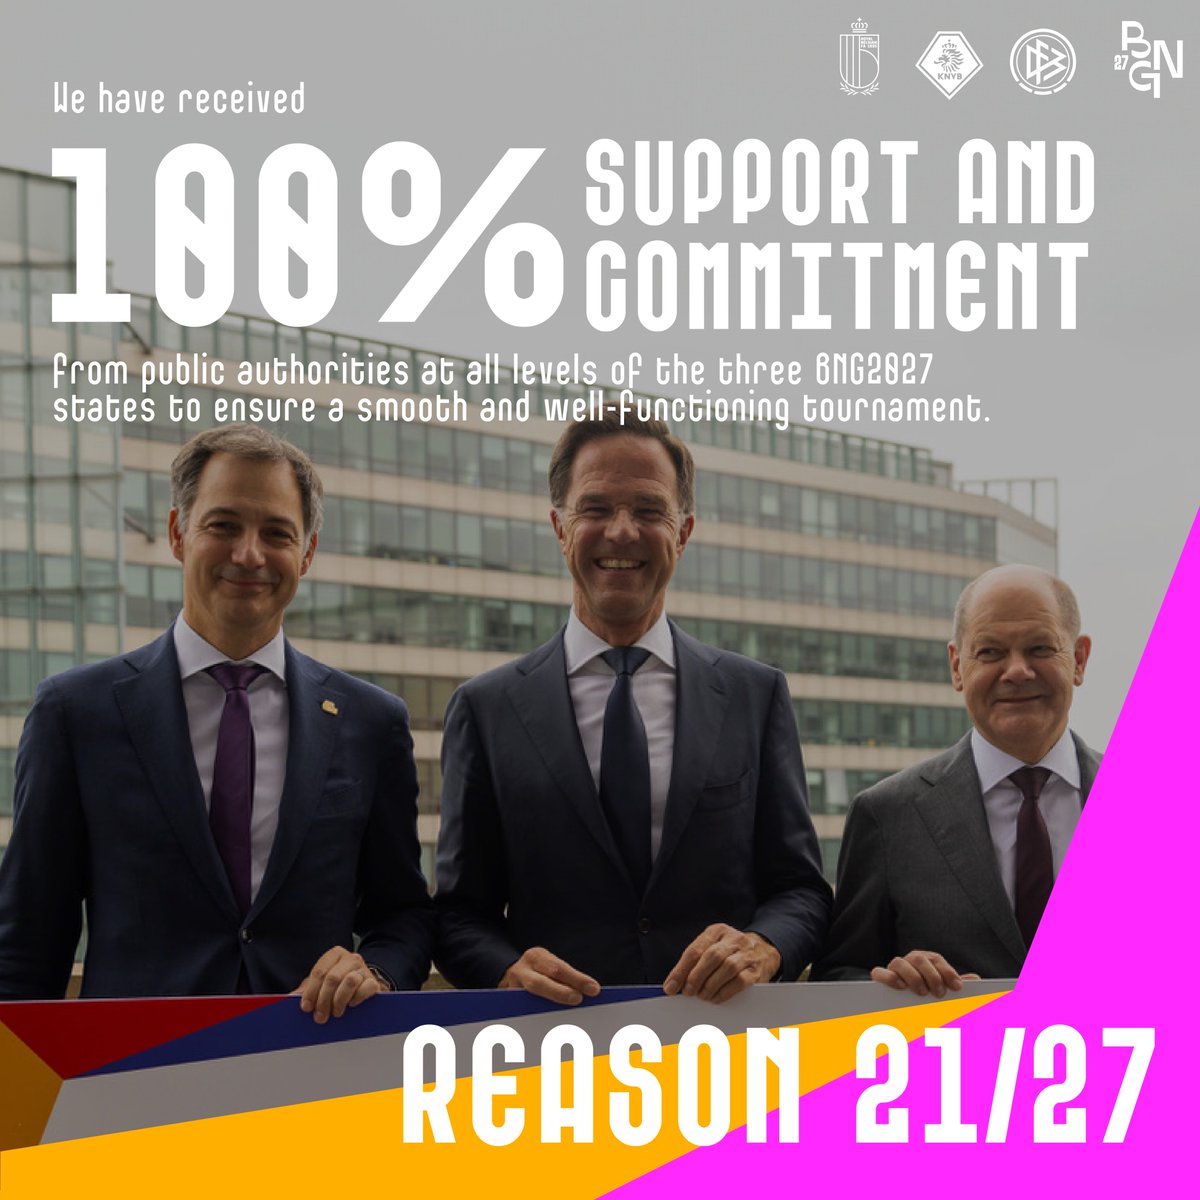 Reason 21 📢 Grateful for 100% support from authorities across all BNG2027 states. 🙌

#Womensfootball #BNG2027 #RBFA #KNVB #DFB